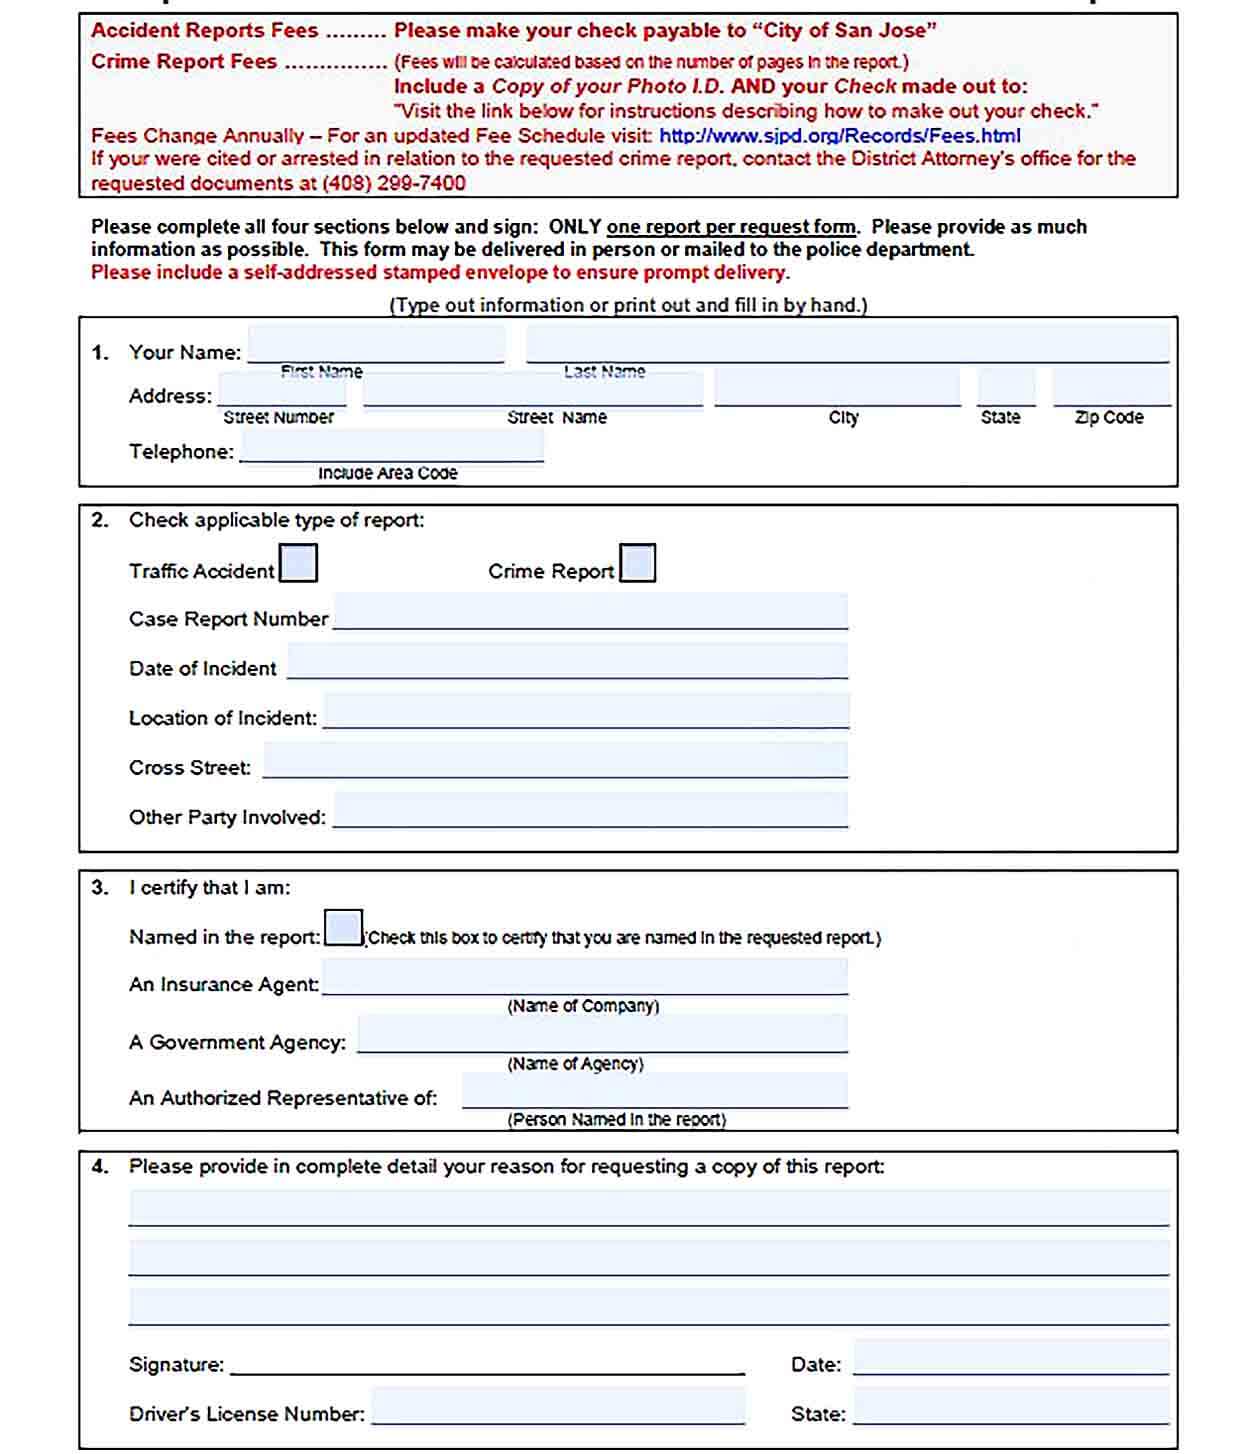 Sample POLICE REPORT REQUEST FORM